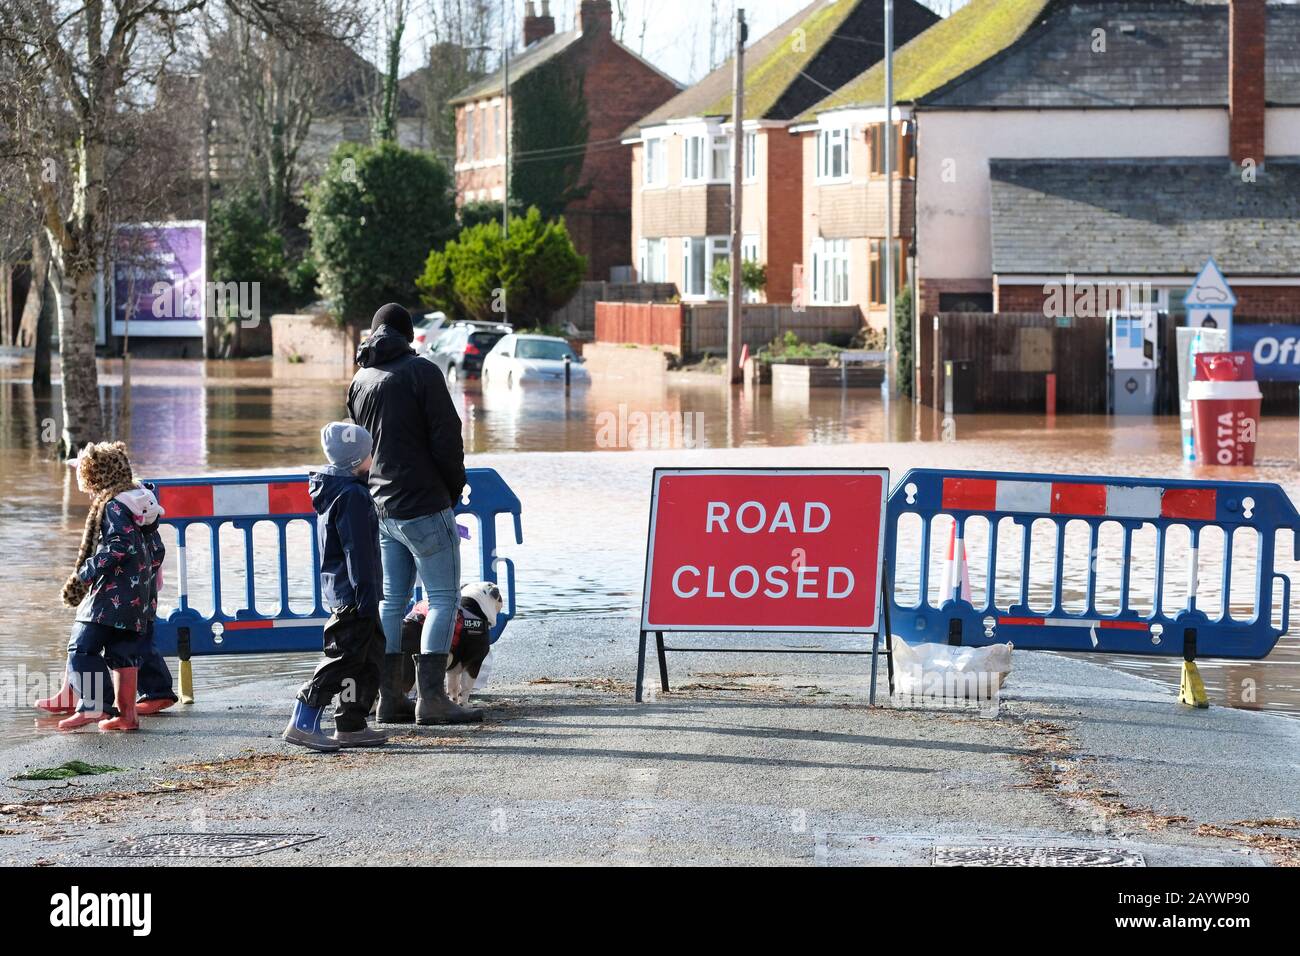 Hereford, Herefordshire, UK - Monday 17th February 2020 - A young family stops to view the flooding along the Ledbury Road area of the city which includes a flooded Texaco fuel station.  Photo Steven May / Alamy Live News Stock Photo